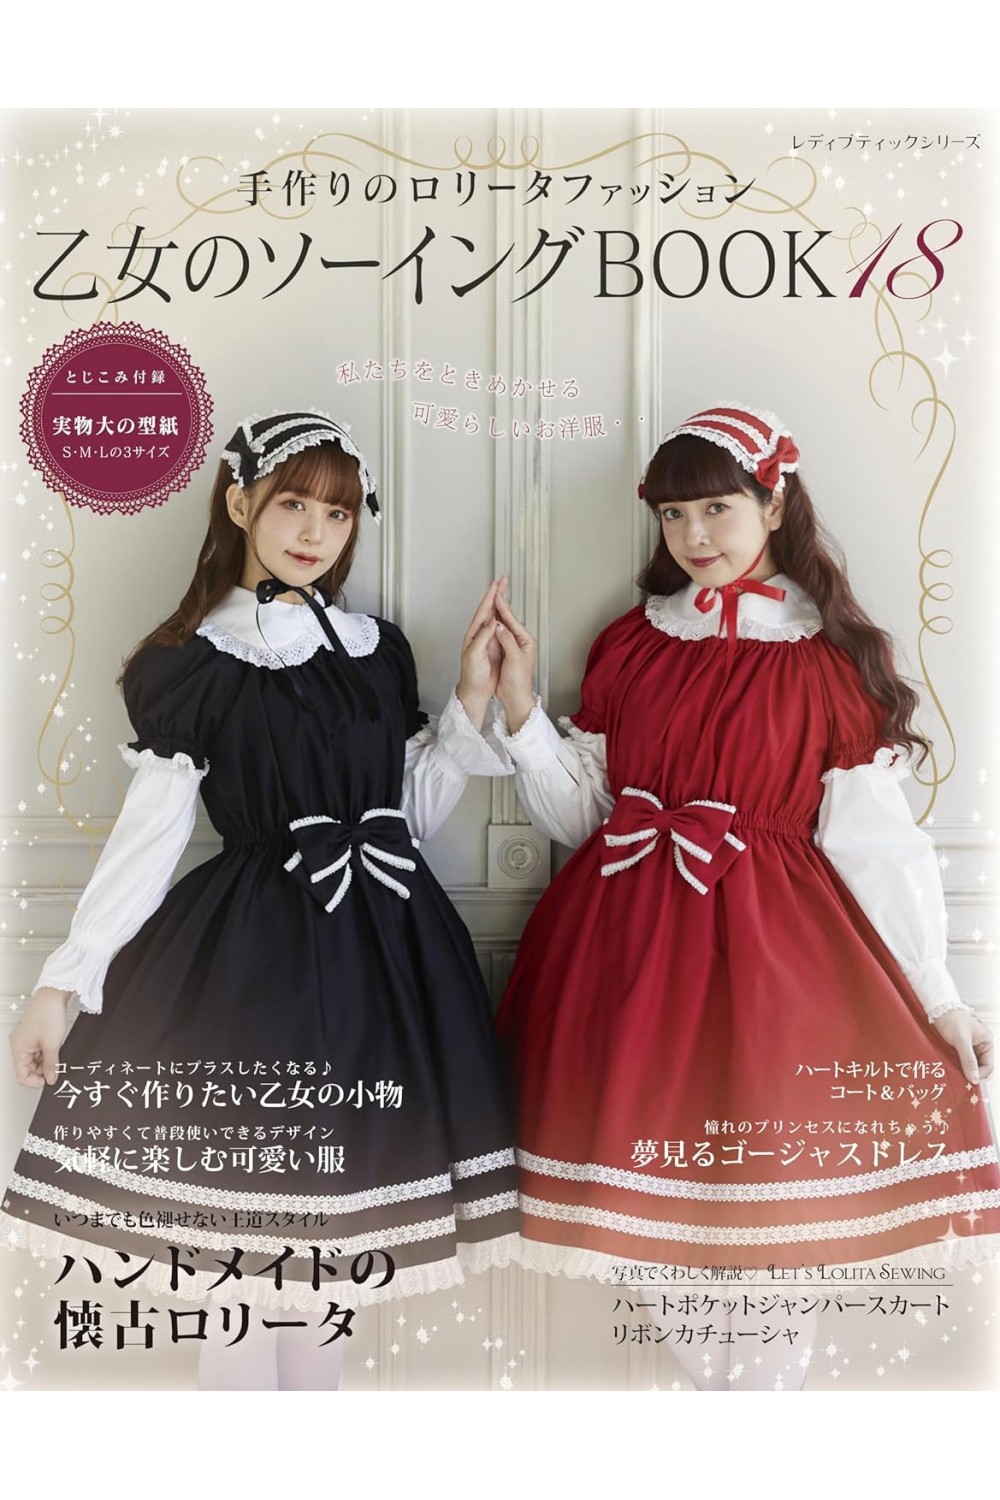 Otome no Sewing BOOK 18 - Patterns for Lolita clothing